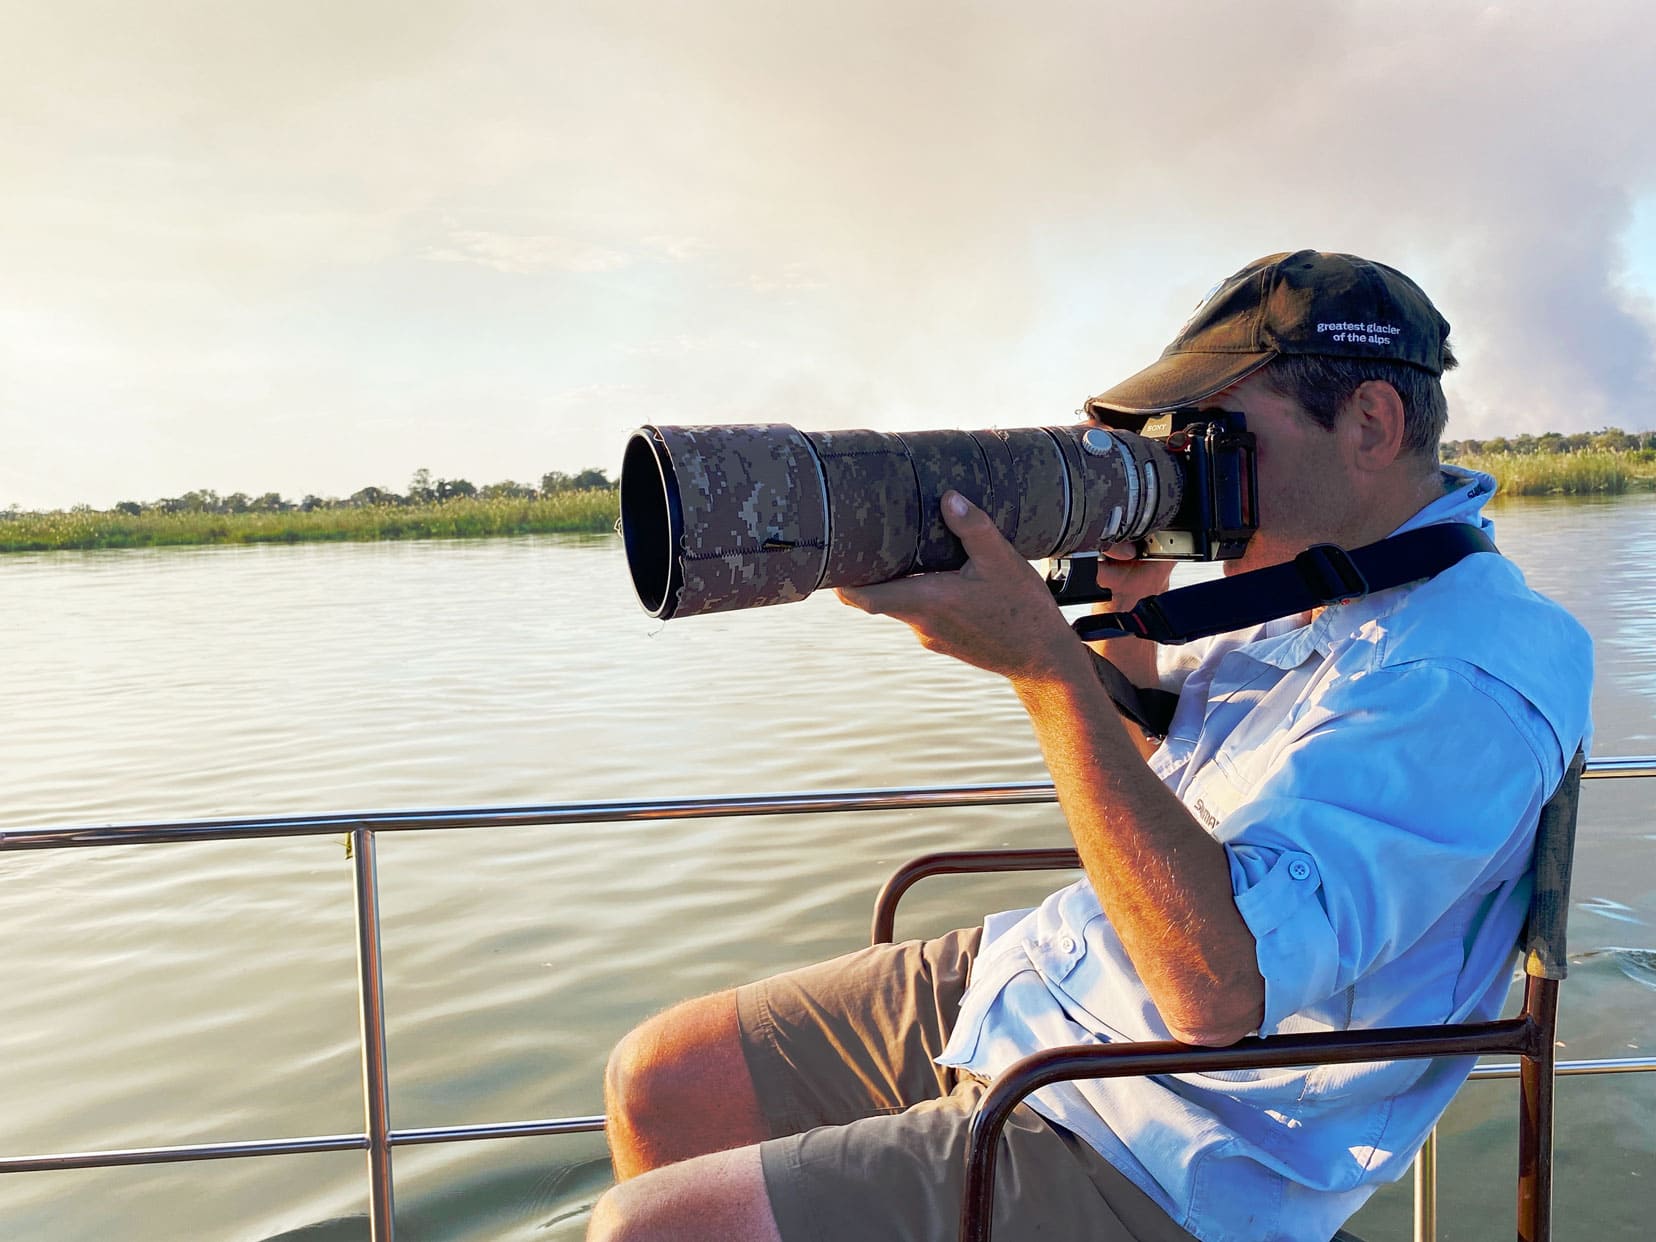 Lars sat on a boat on the okavango river taking a phot with a large lens on his camera